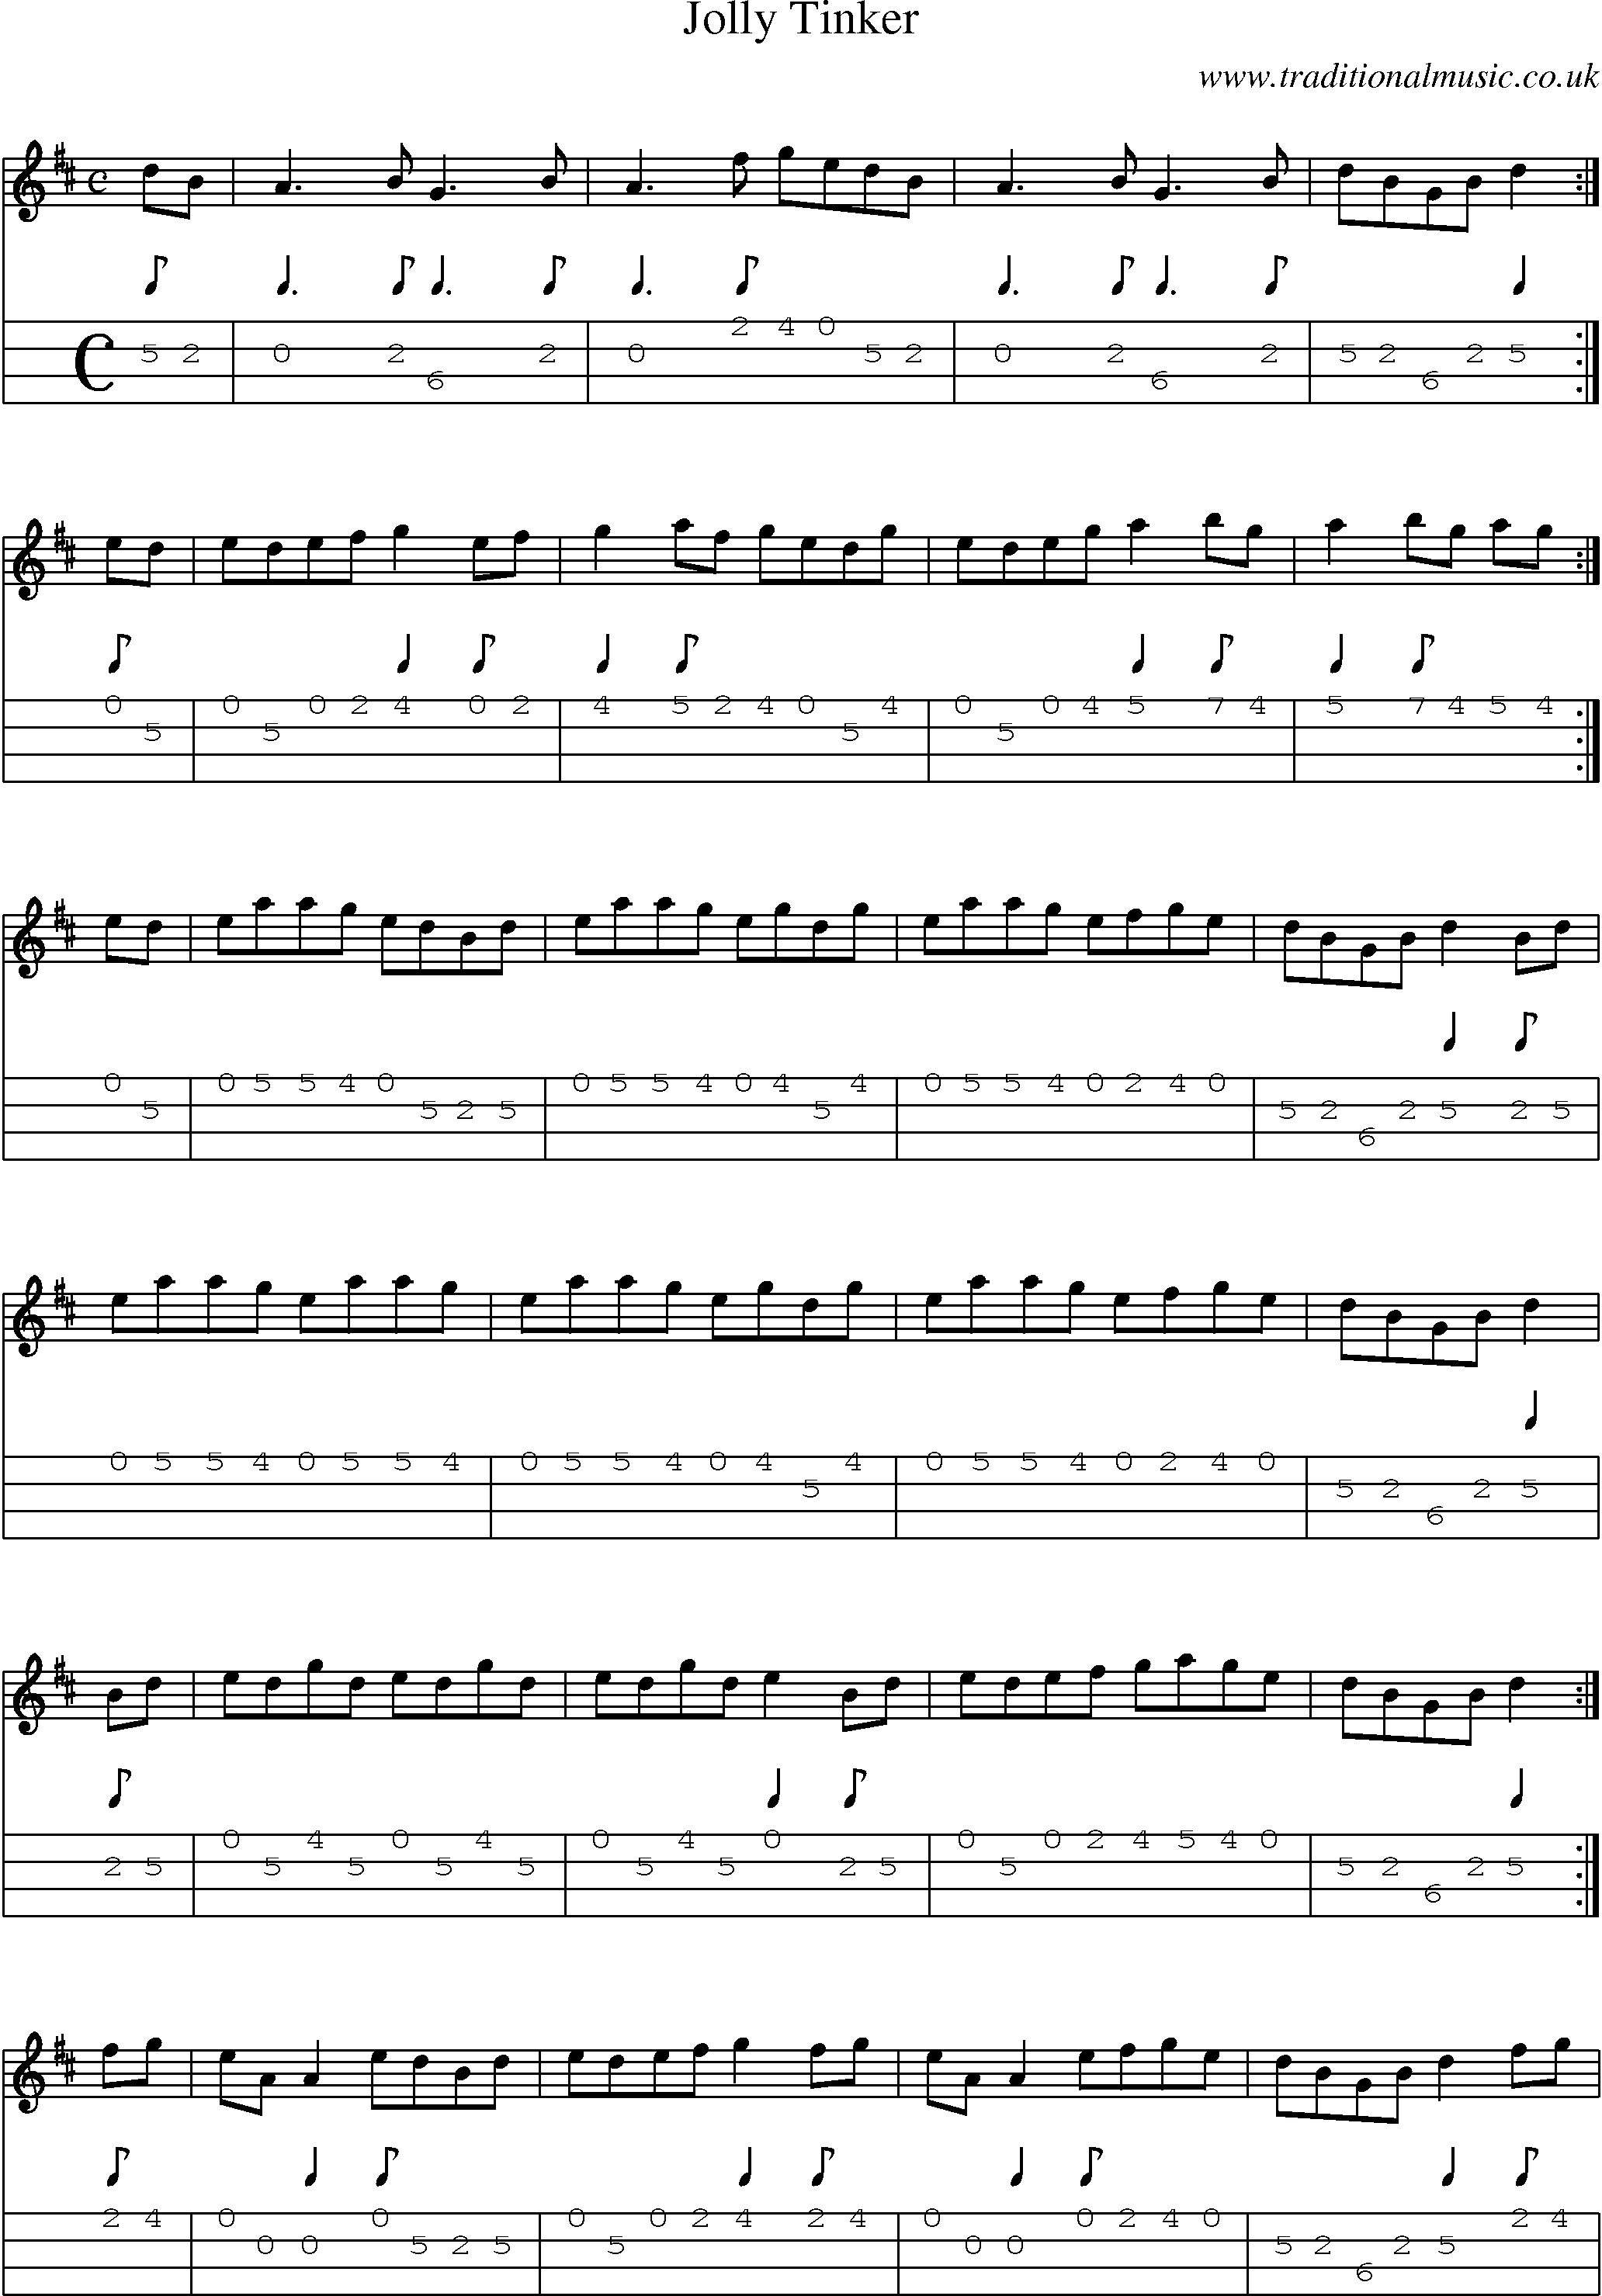 Music Score and Mandolin Tabs for Jolly Tinker 1